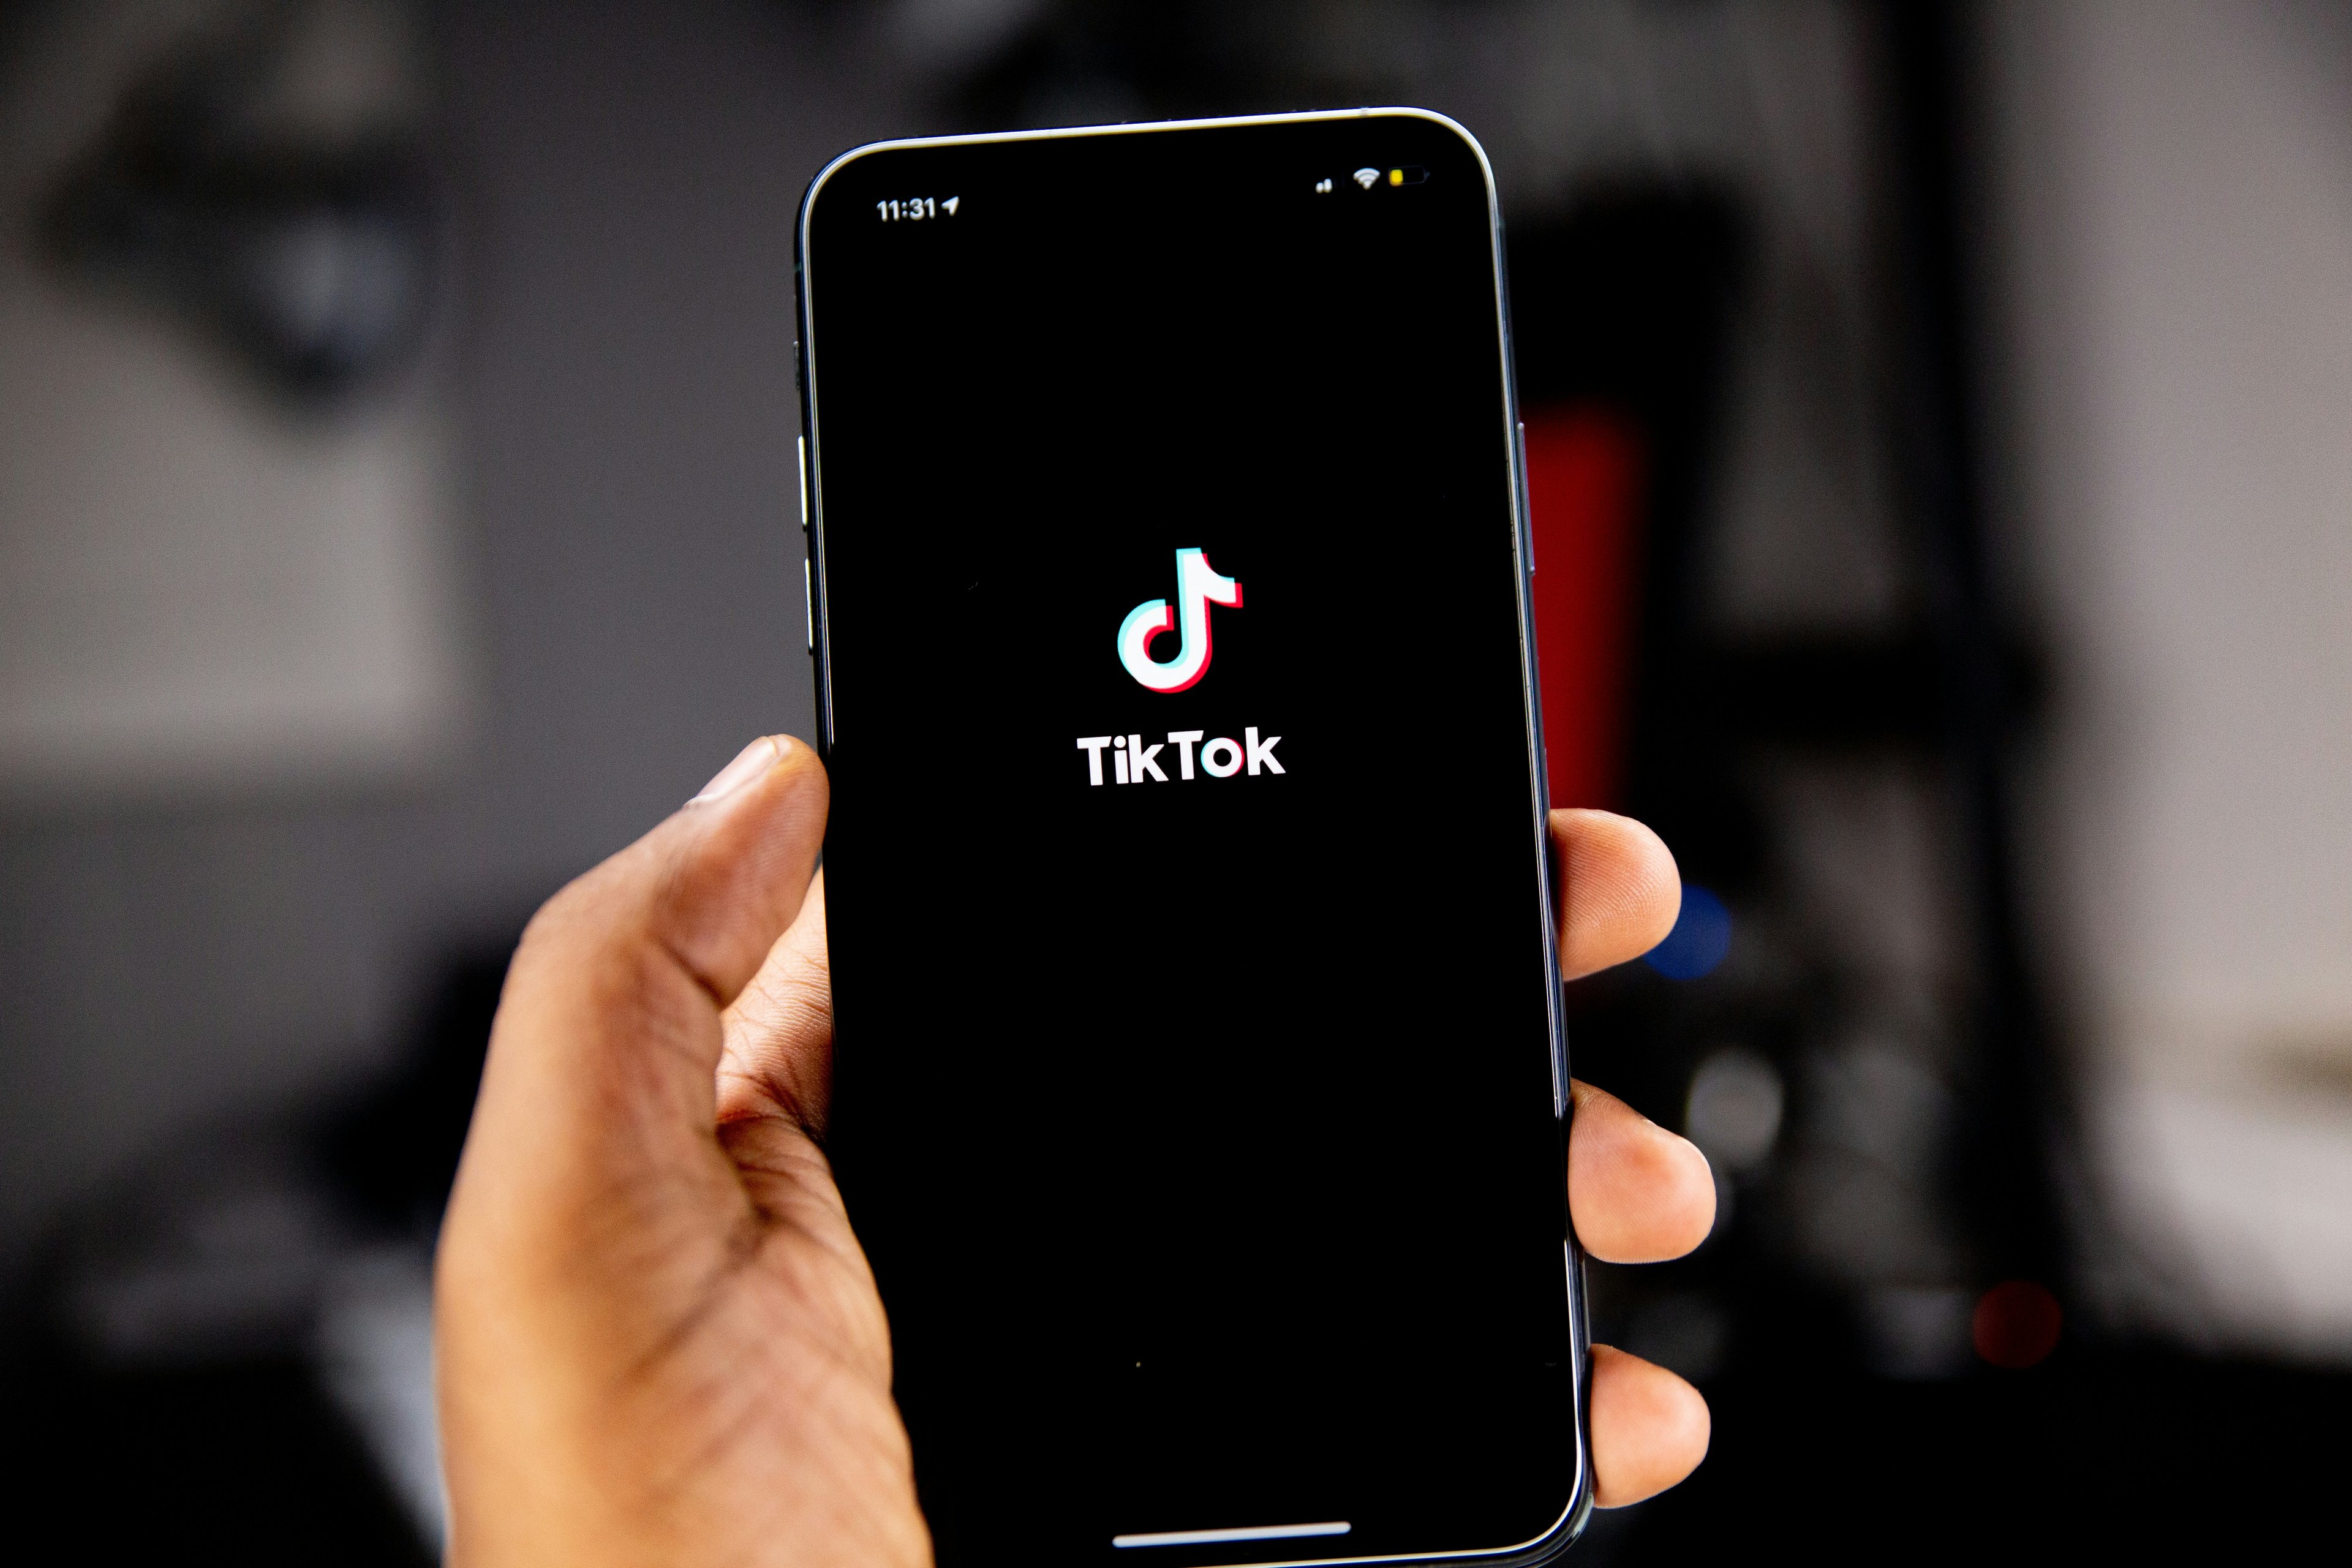 A phone showing the TikTok welcome screen